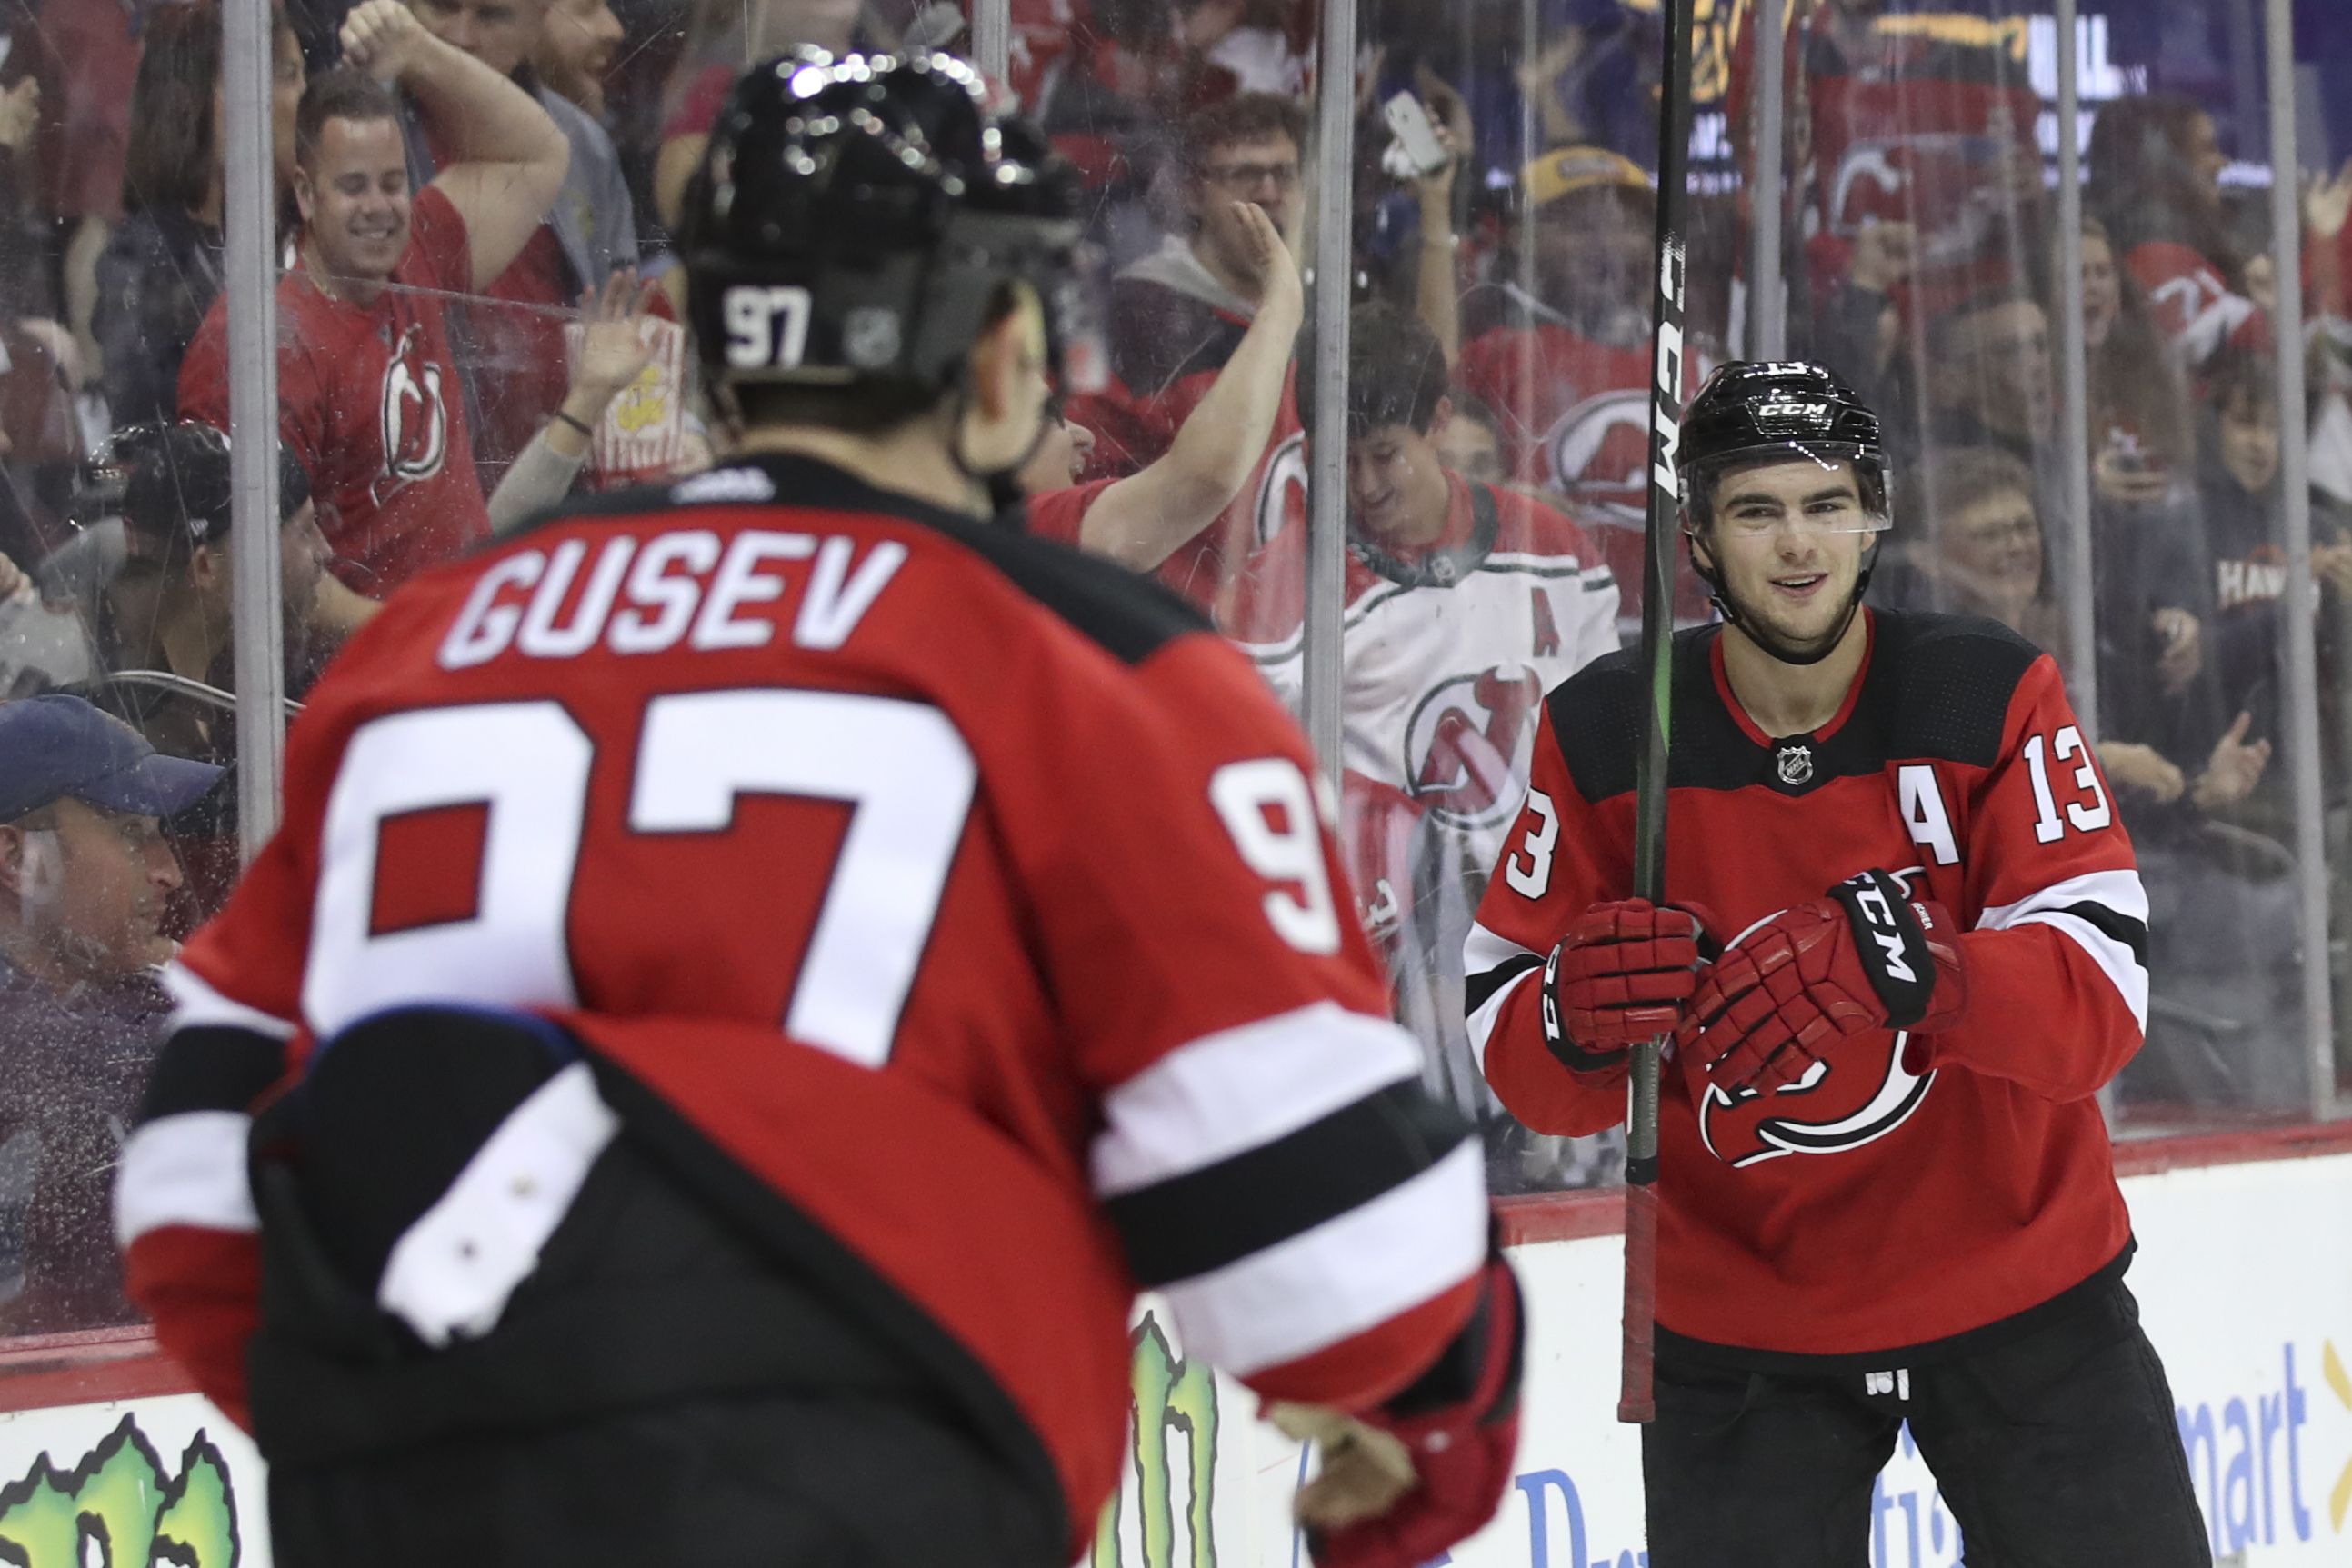 Hischier agrees to first contract with Devils